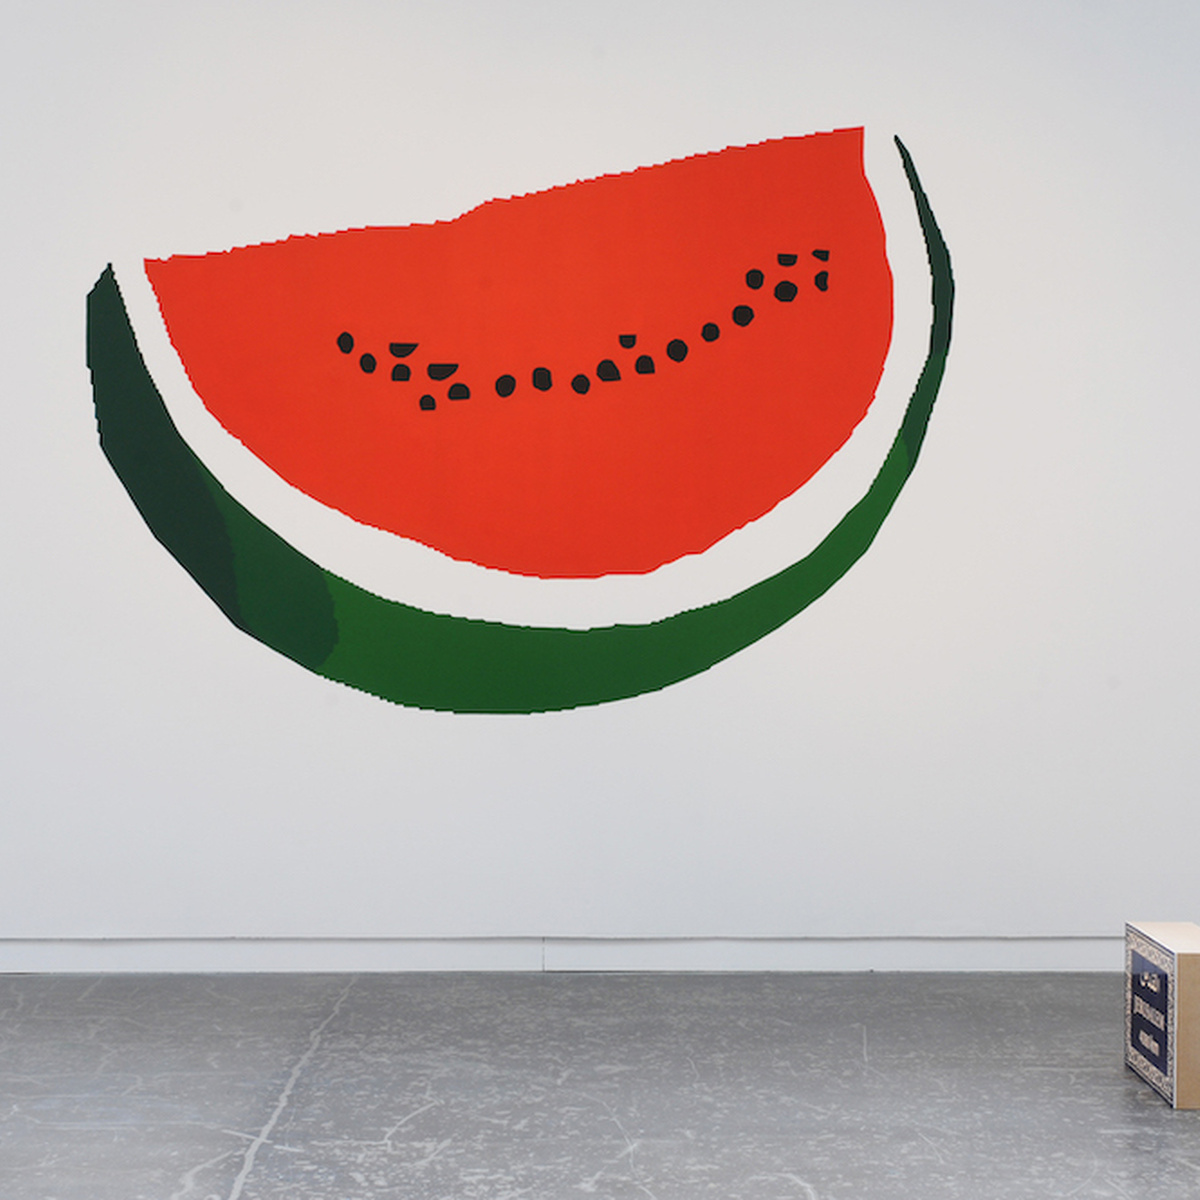 A large painting of a watermelon is displayed on a gallery wall.